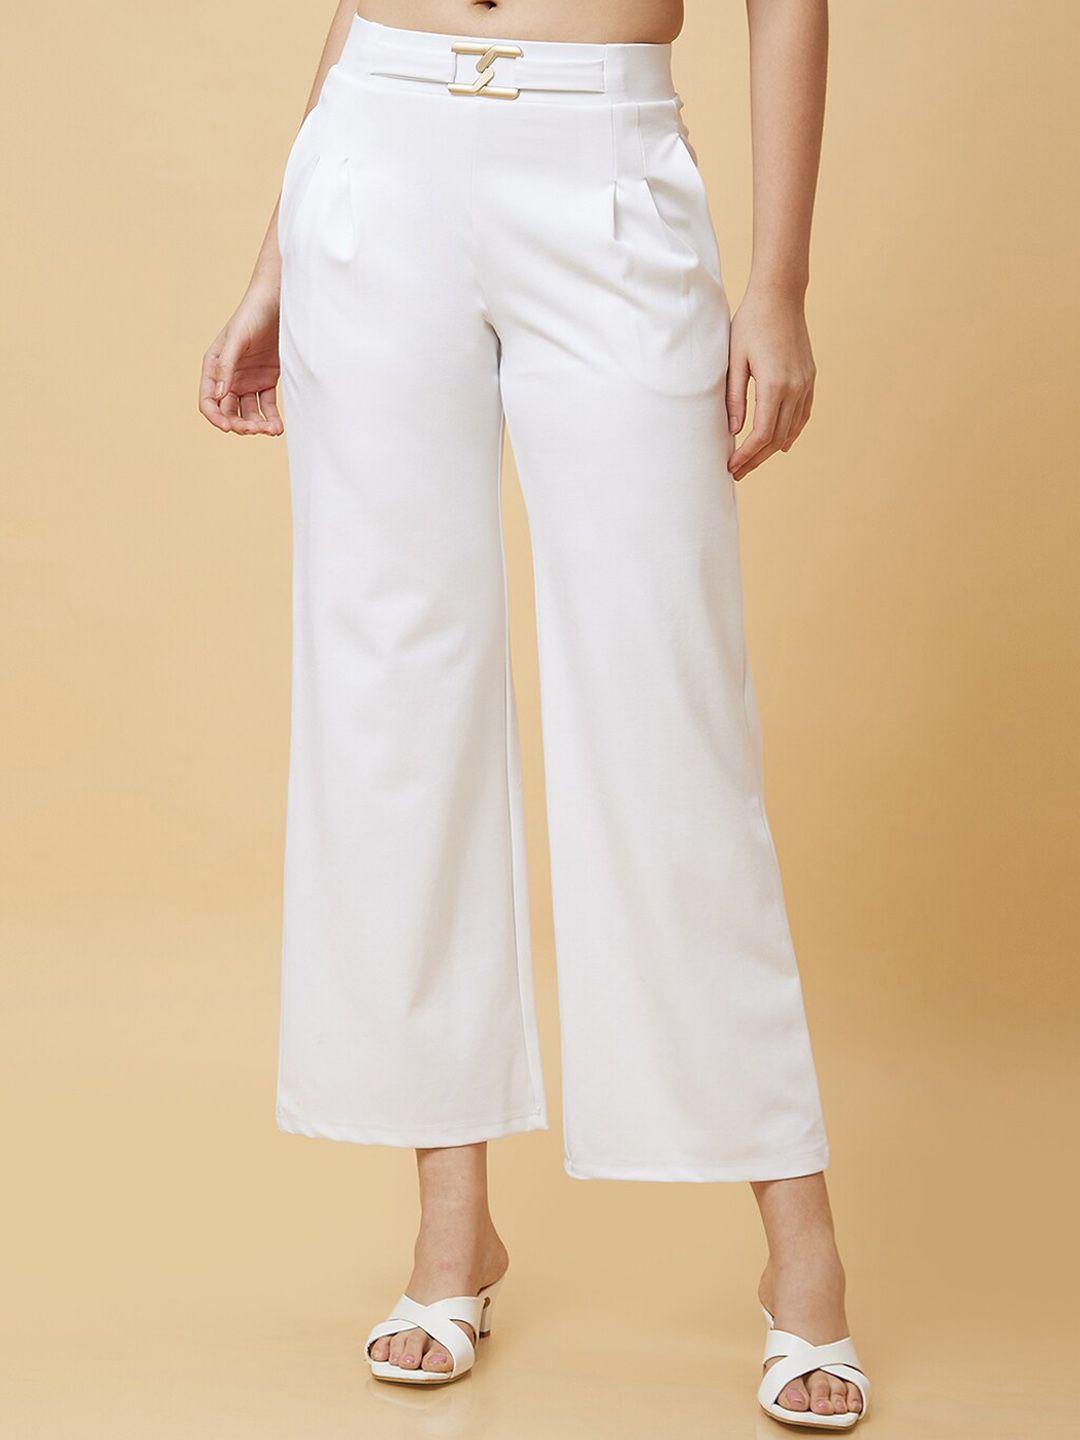 globus-women-loose-fit-high-rise-pleated-trousers